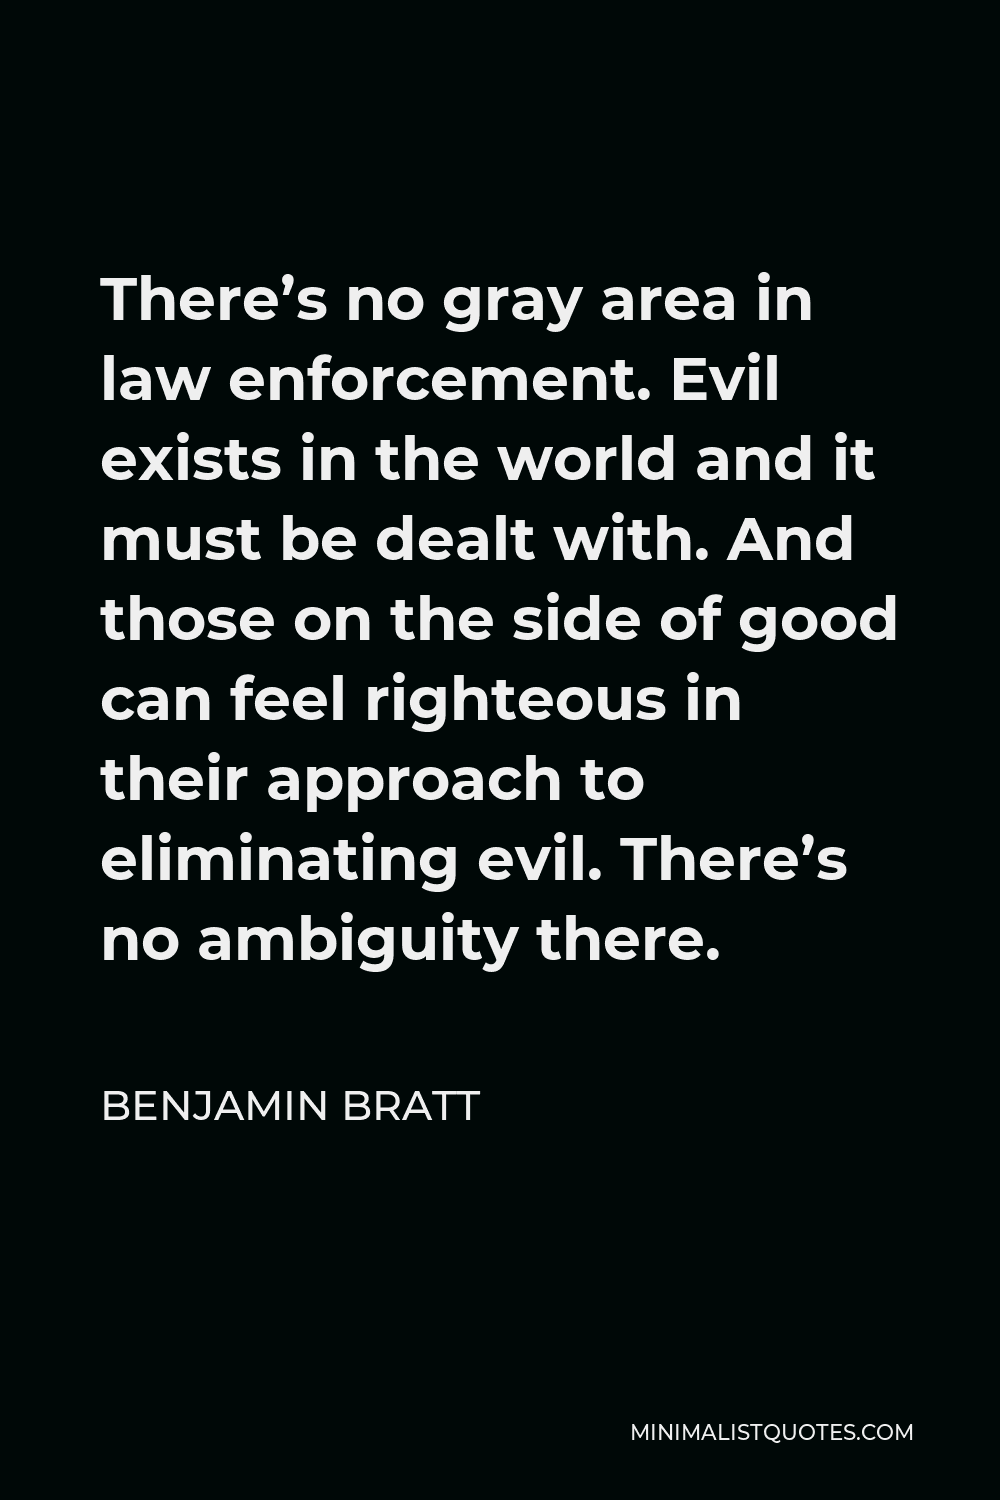 Benjamin Bratt Quote - There’s no gray area in law enforcement. Evil exists in the world and it must be dealt with. And those on the side of good can feel righteous in their approach to eliminating evil. There’s no ambiguity there.